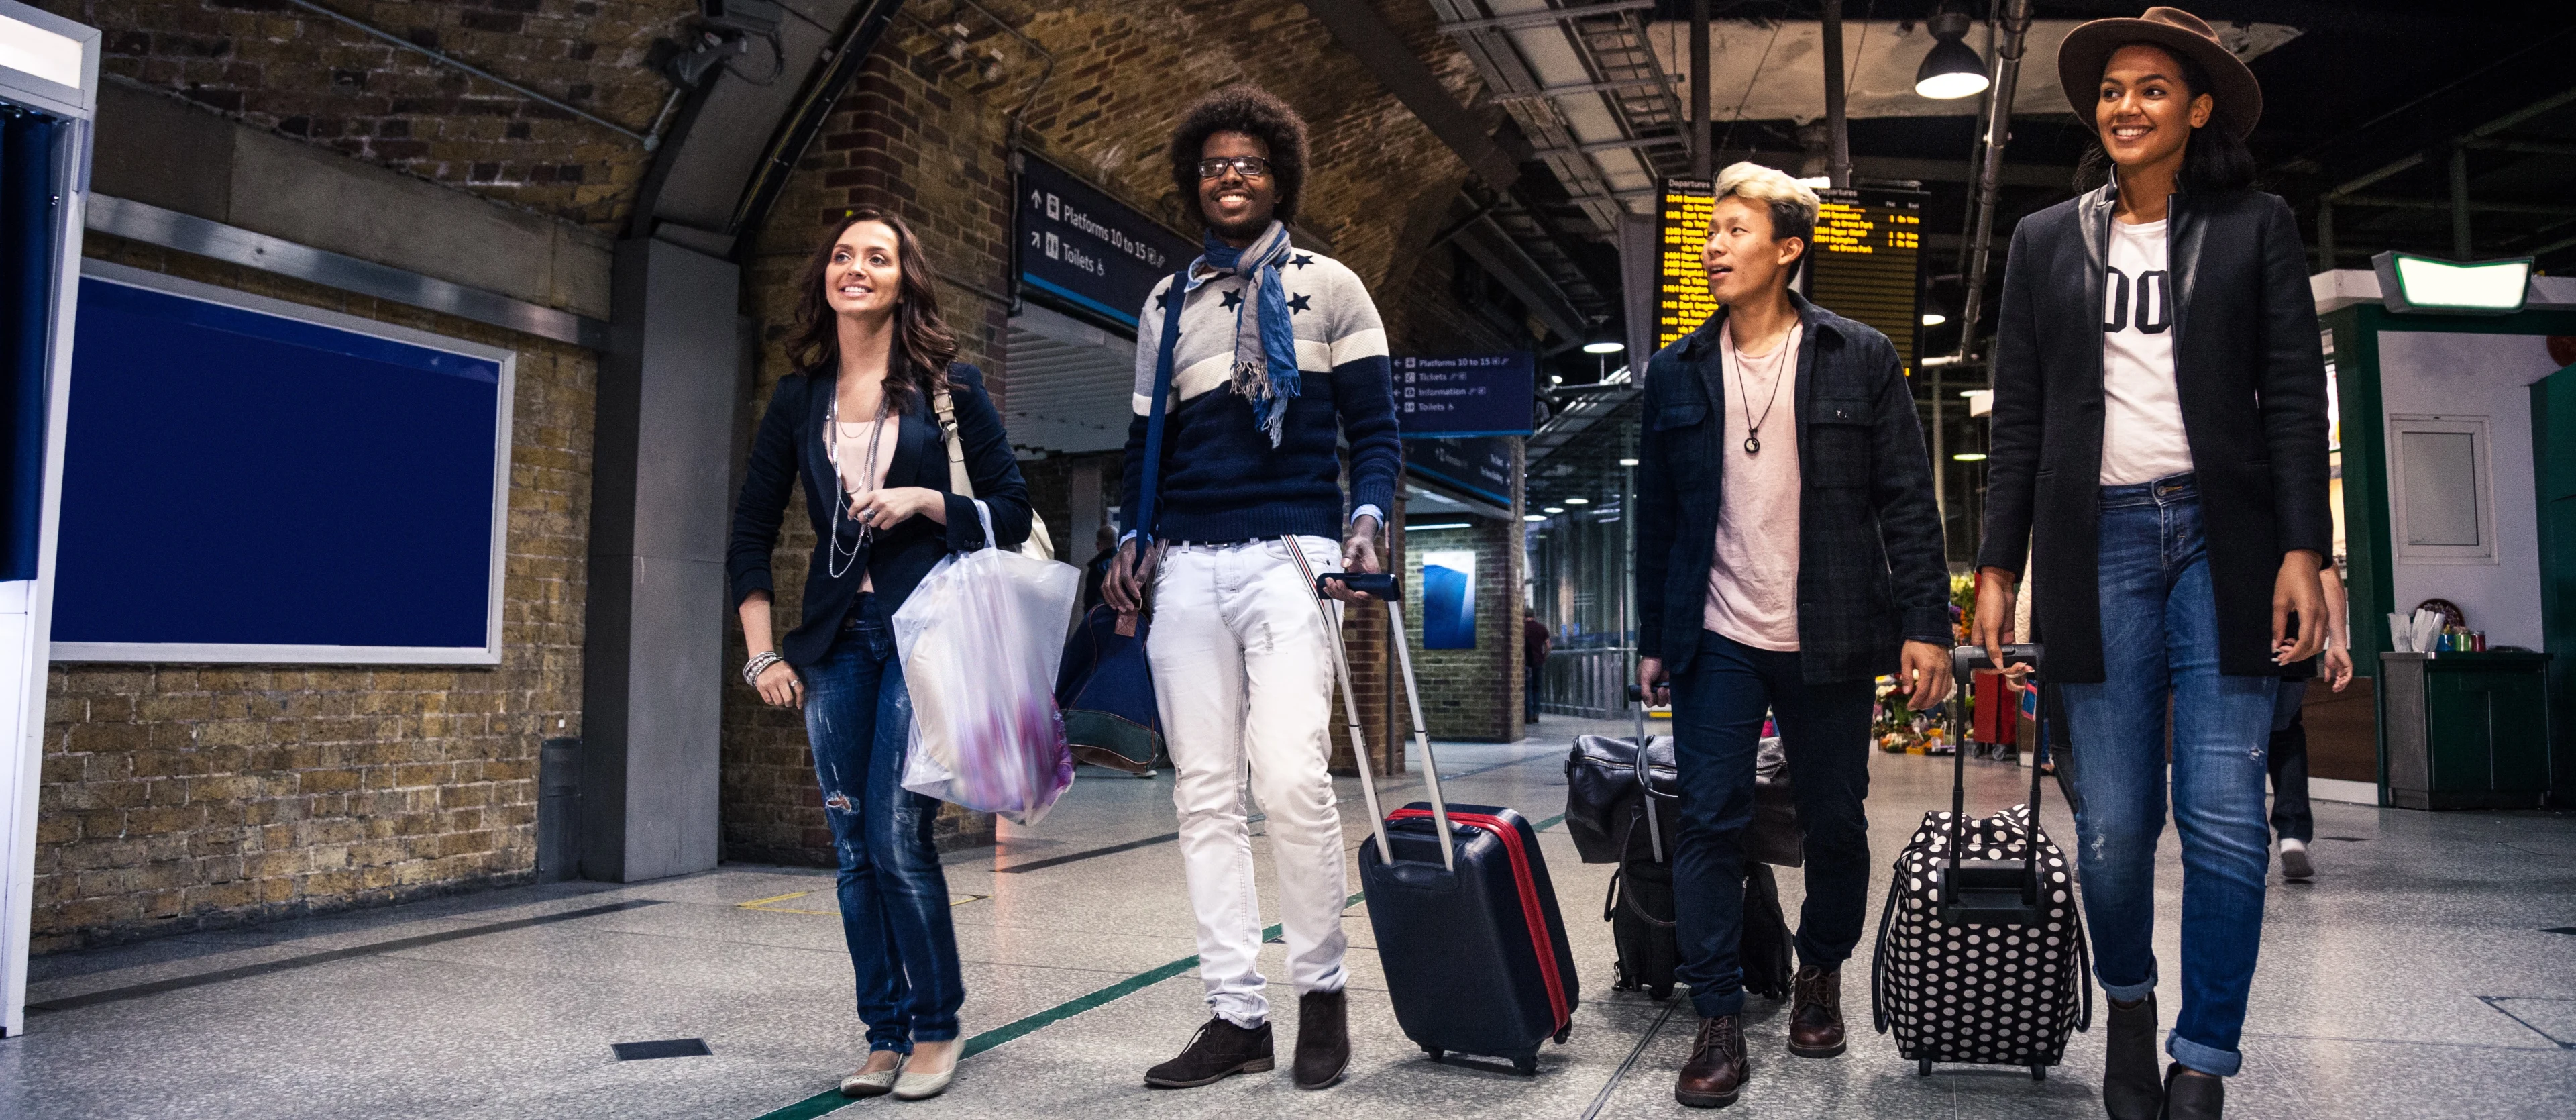 A group of 4 happy friends walk through a train station all pulling or carrying bags and suitcases